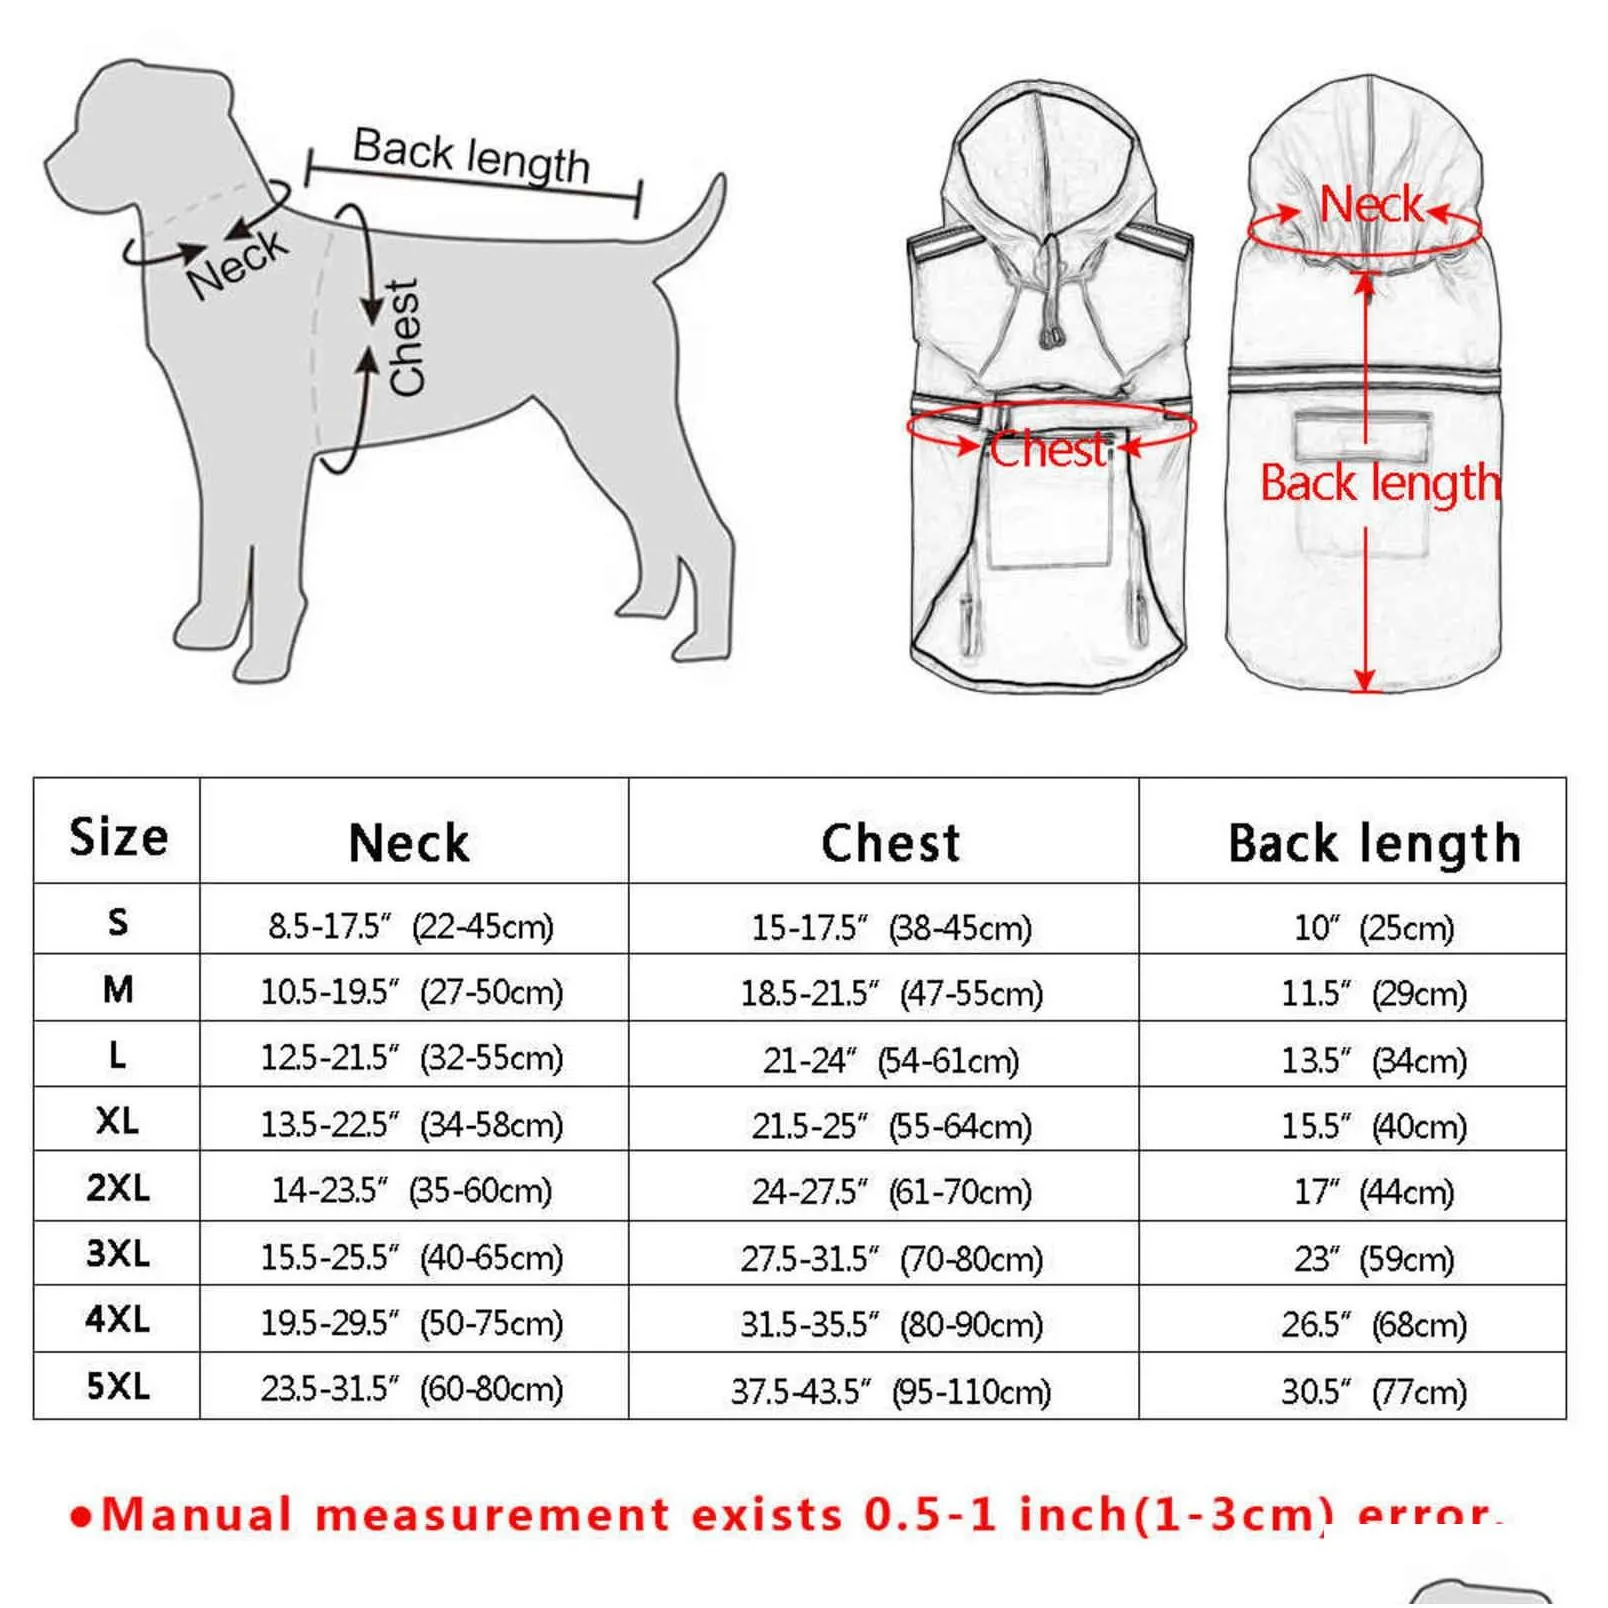 raincoat for dogs waterproof coat jacket reflective clothes small medium large labrador s-5xl 3 colors 211027